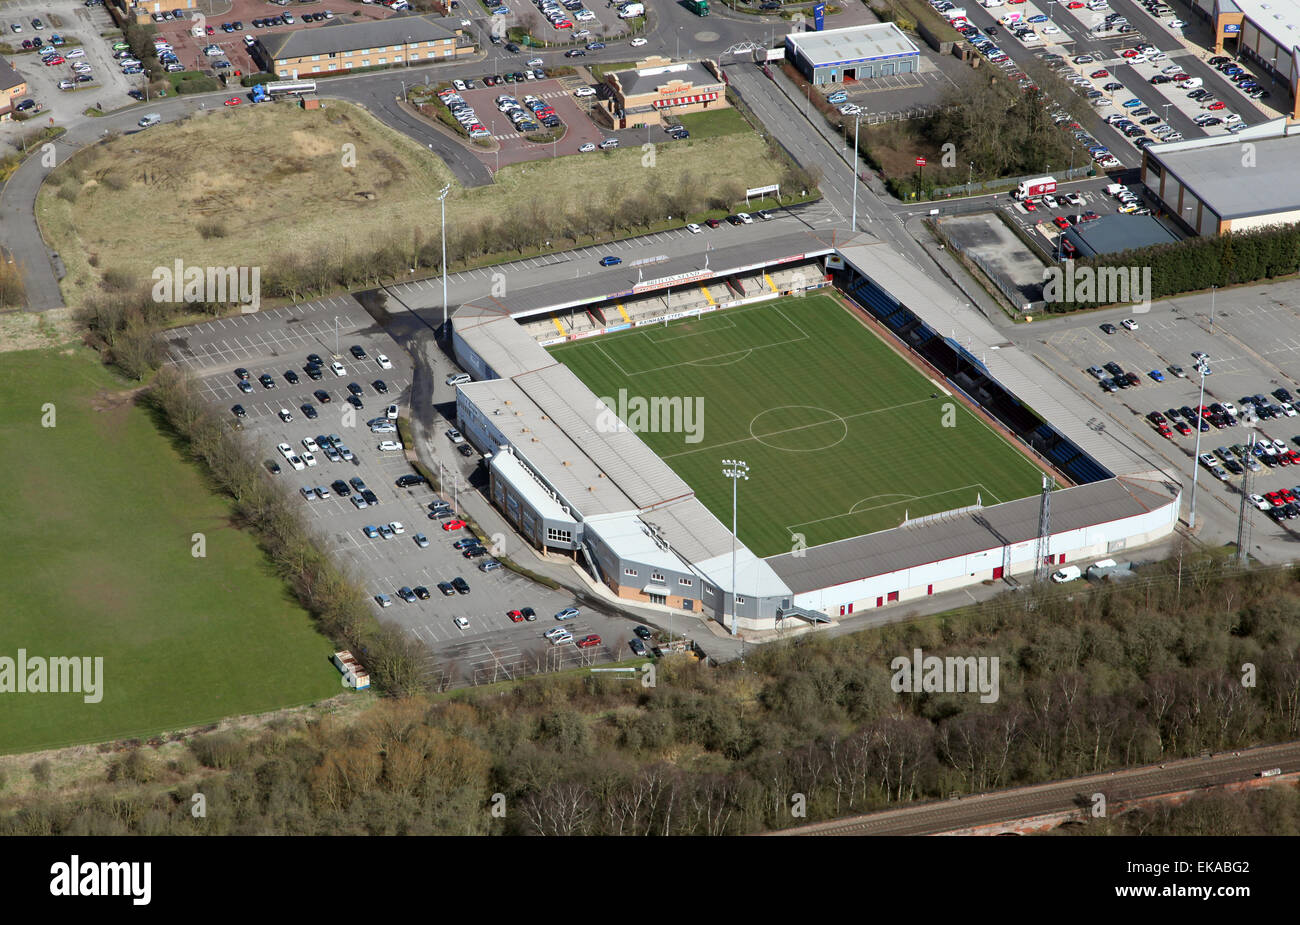 aerial view of Scunthorpe United football ground Glanford Park, UK Stock Photo